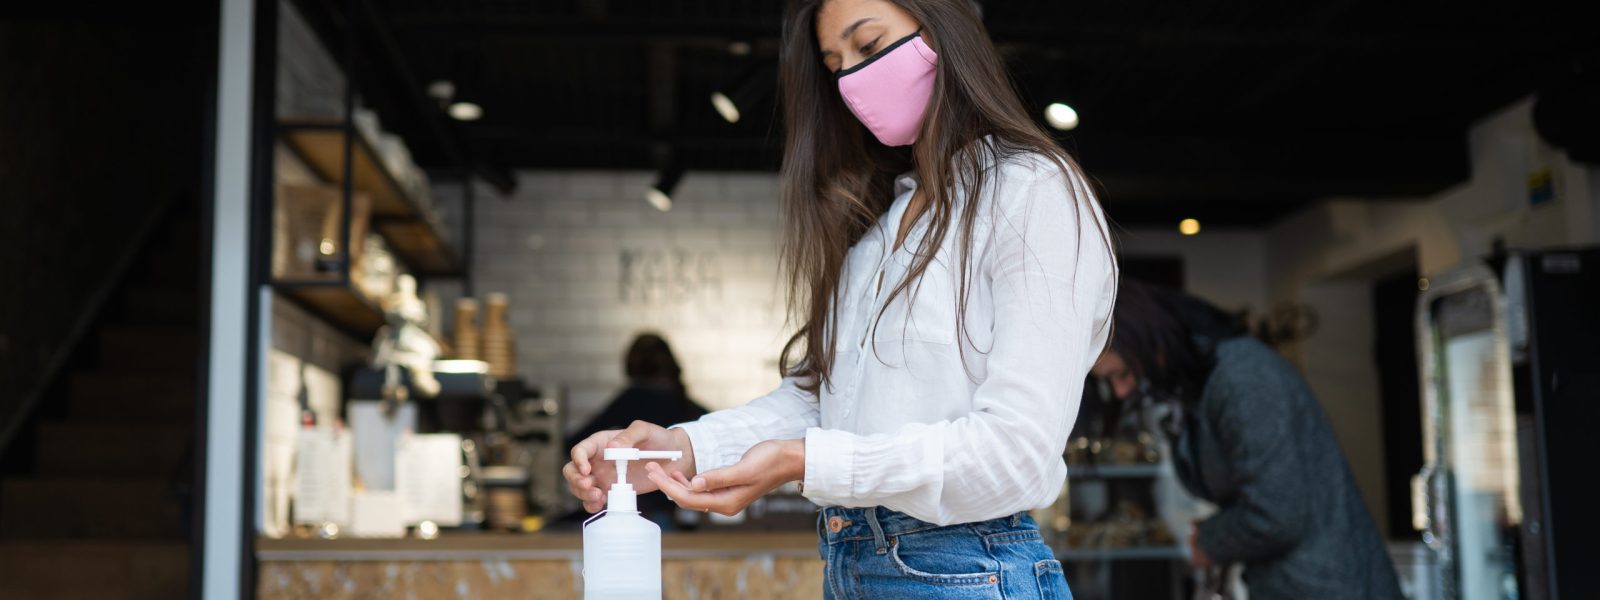 Young beautiful woman with attractive smile in protective mask using hand sanitizer gel to wash her hands. Girl stands threshold outside in cafe scene. Corona Virus prevention concept.